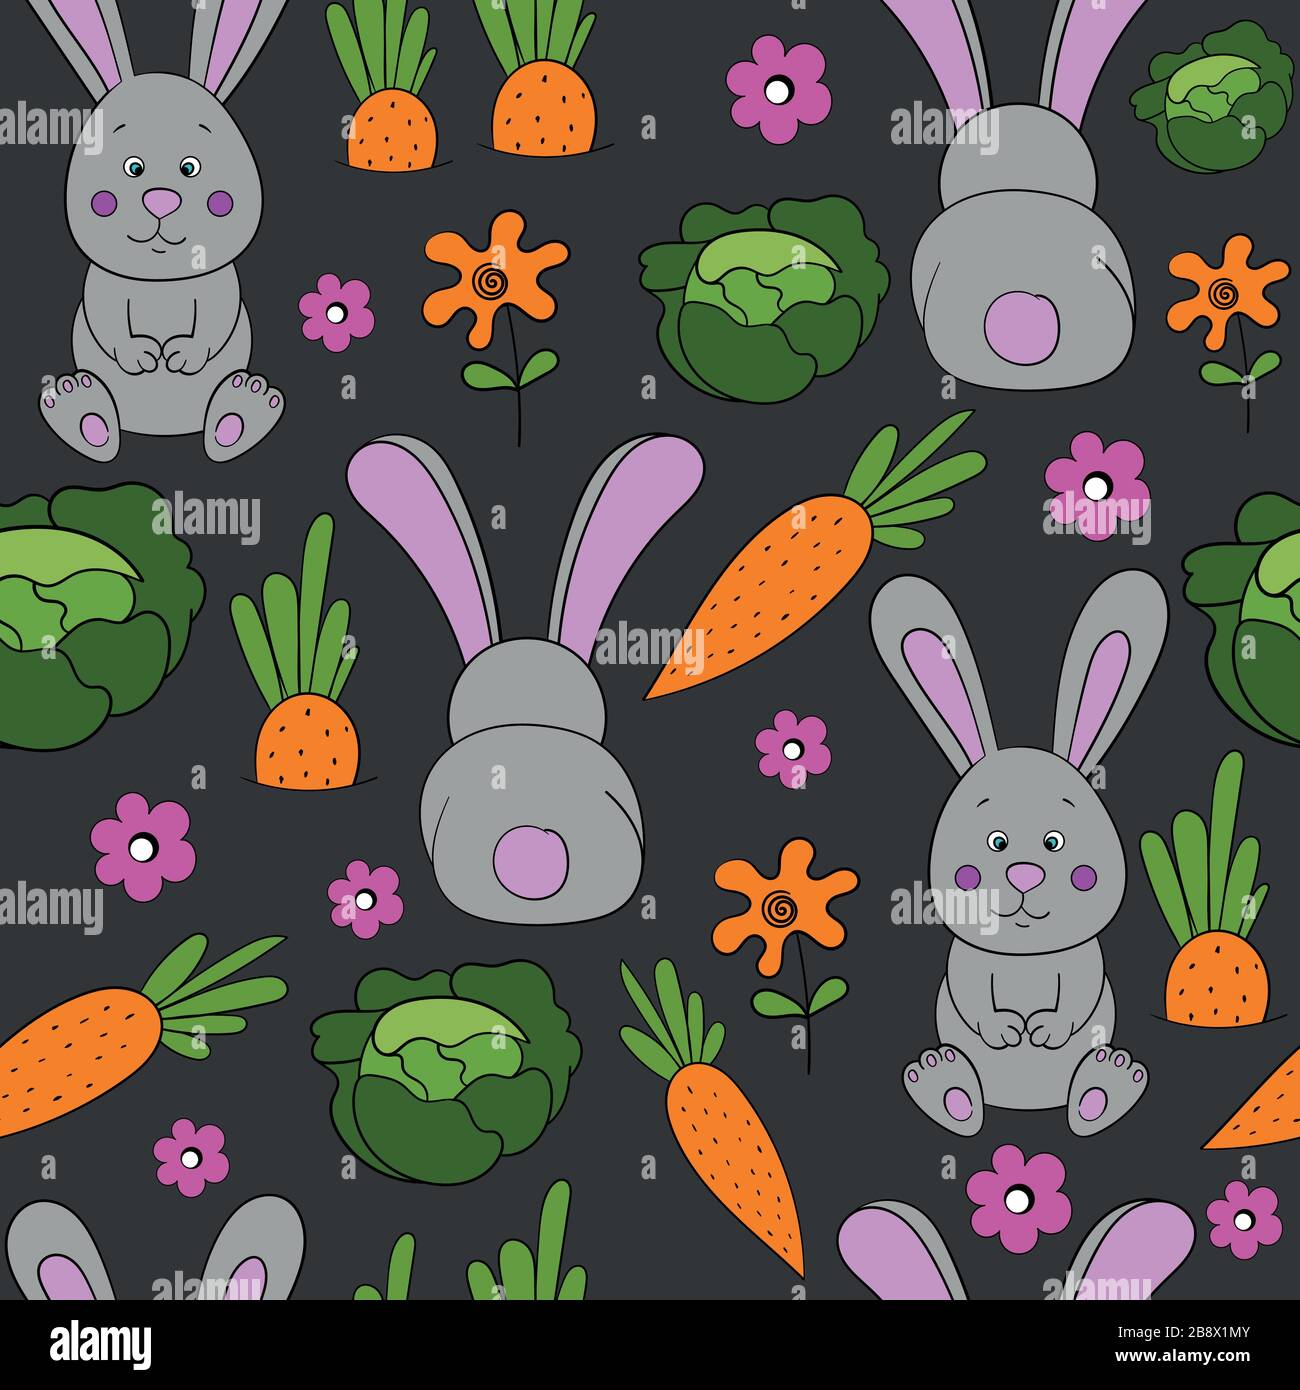 Seamless pattern with colored rabbits, flowers, carrots and cabbage on a gray background. Vector illustration. Stock Vector